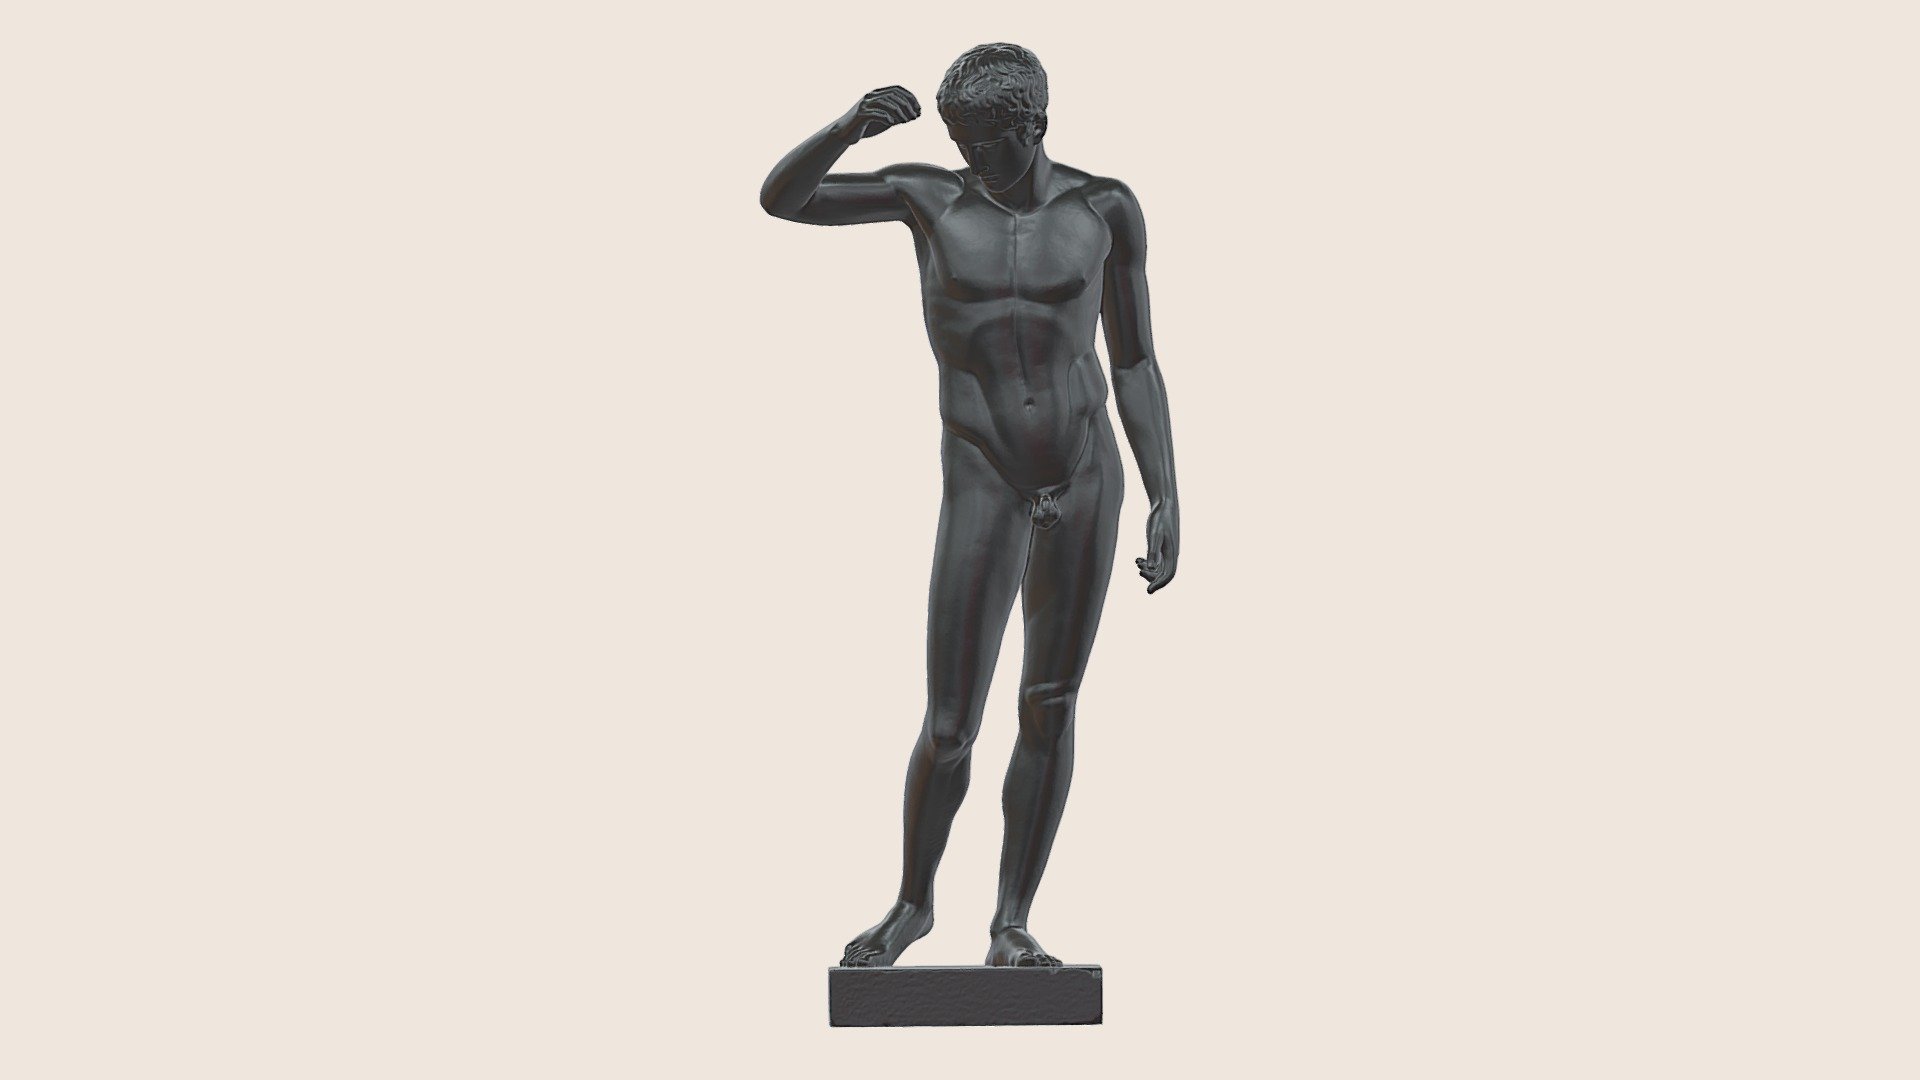 Ancient Greek sculpture: The young man, the so-called Kyniskos, a copy of a sculpture of a follower of Polykleitos from the late 5th century BC, made at WMF Geislingen (Germany), 1905-1909, bronze

Painting 7 gigapixels: https://wirtualnedziedzictwo.pl/gigapixel/Cranach-Philip-I.html

Stained glass  3 gigapixels: https://wirtualnedziedzictwo.pl/gigapixel/stargard/kolegiata.html

The Altarpiece of Veit Stoss 4 gigapixels: https://wirtualnedziedzictwo.pl/gigapixel/krakow-bazylika-mariacka/oltarz.html

Church facade  4,5 gigapixels: https://wirtualnedziedzictwo.pl/gigapixel/krzeszow-bazylika/fasada.html

Gigapixel panoramas: https://maryjny.org/gigapanorama/krzeszow/?lang=en

Pieta 4K: https://youtu.be/kUbBGsF4vIk

Baptismal font 3D Model: https://skfb.ly/on7MH

Architectural 3D Model: https://skfb.ly/on9vU

Virtual Room: https://youtu.be/DfoJcuQkf5s

Point Cloud: https://youtu.be/YMB7x9hKEc0

Website: https://maryjny.org/en - The young man, the so-called Kyniskos - 3D model by FWNDK 3d model